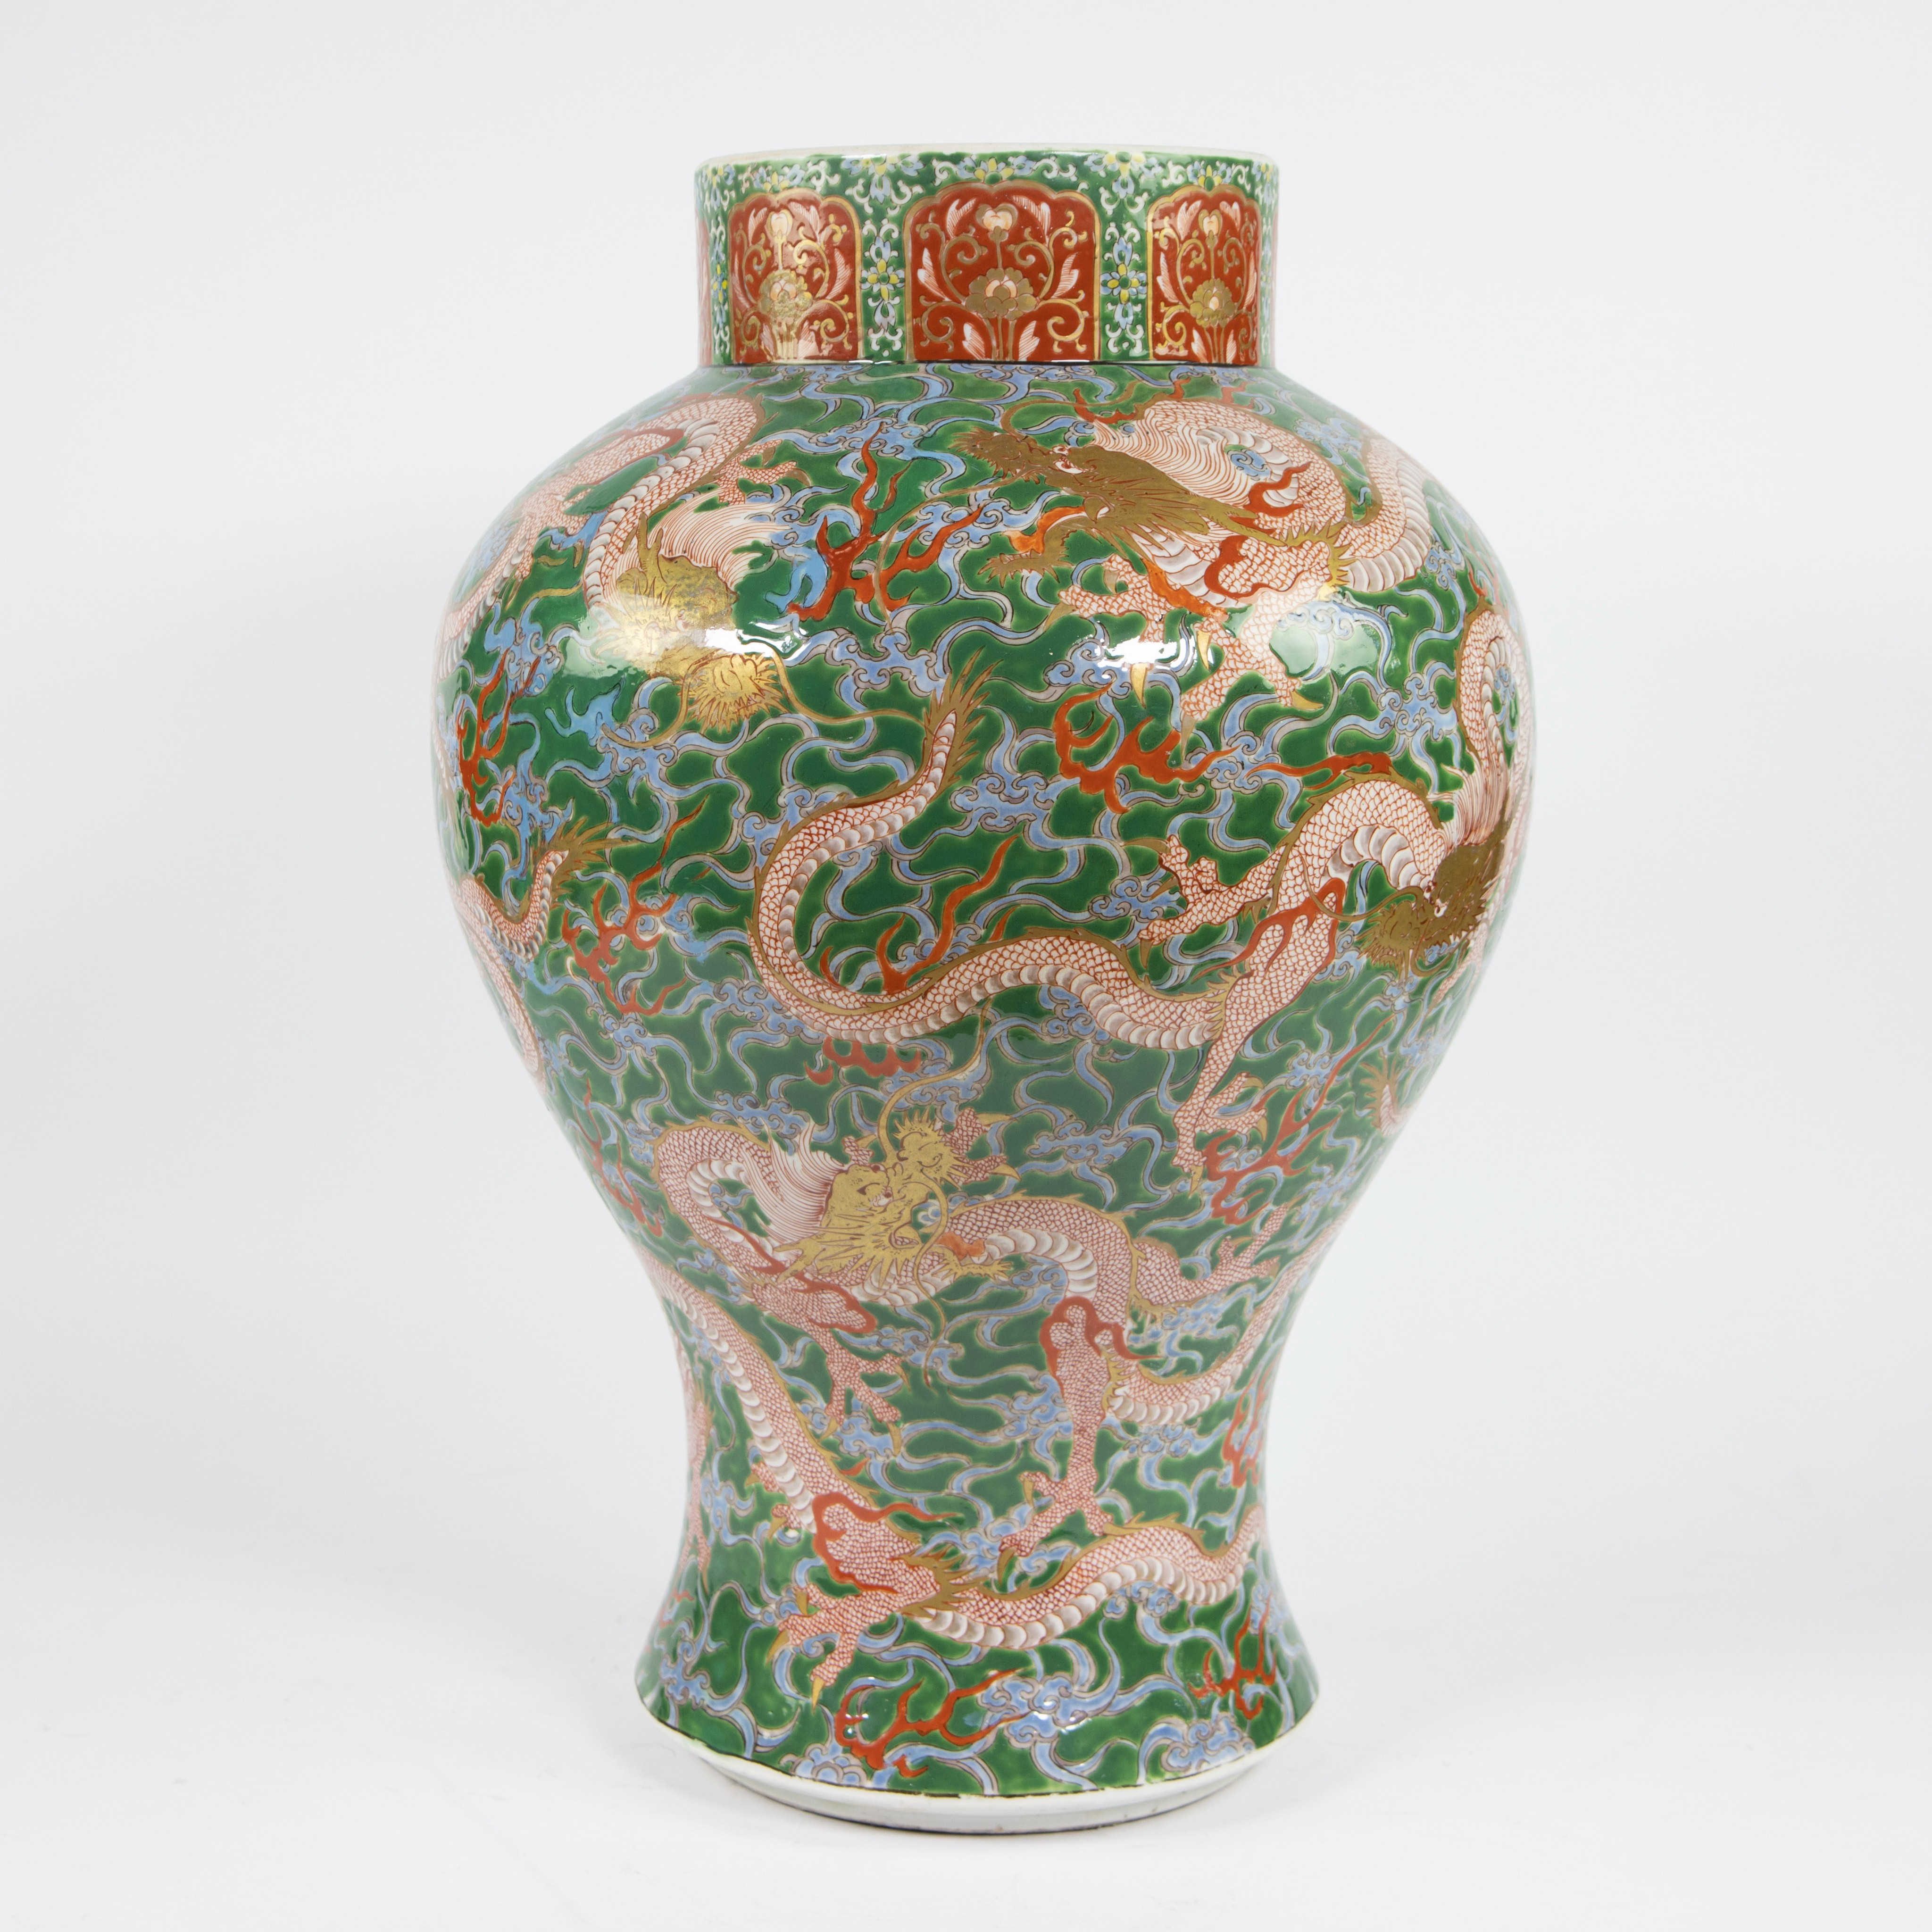 Chinese/Japanese vase marked Chenghua, Guangxu period, late 19th century - Image 3 of 6